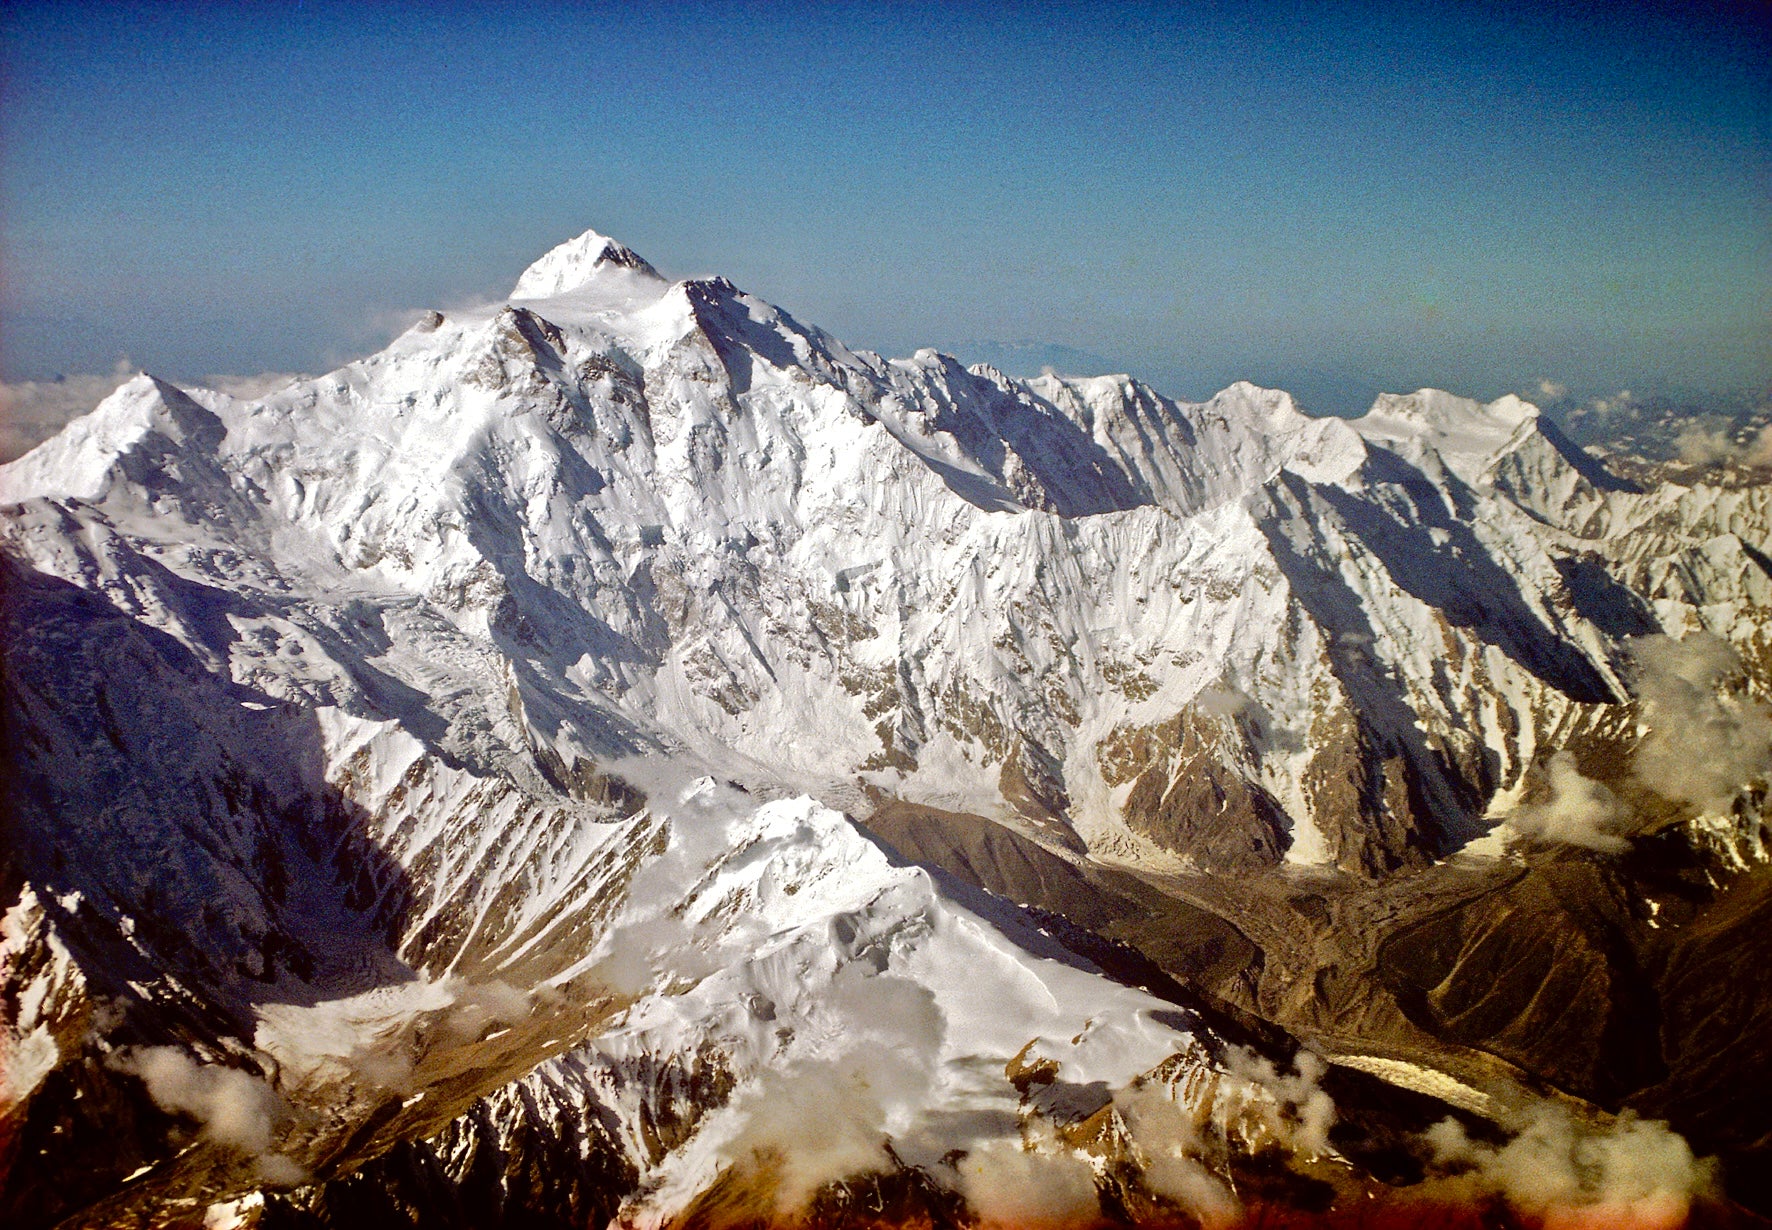 Nanga Parbat – this magnificent mountain delineates the western end of the Himalaya range.